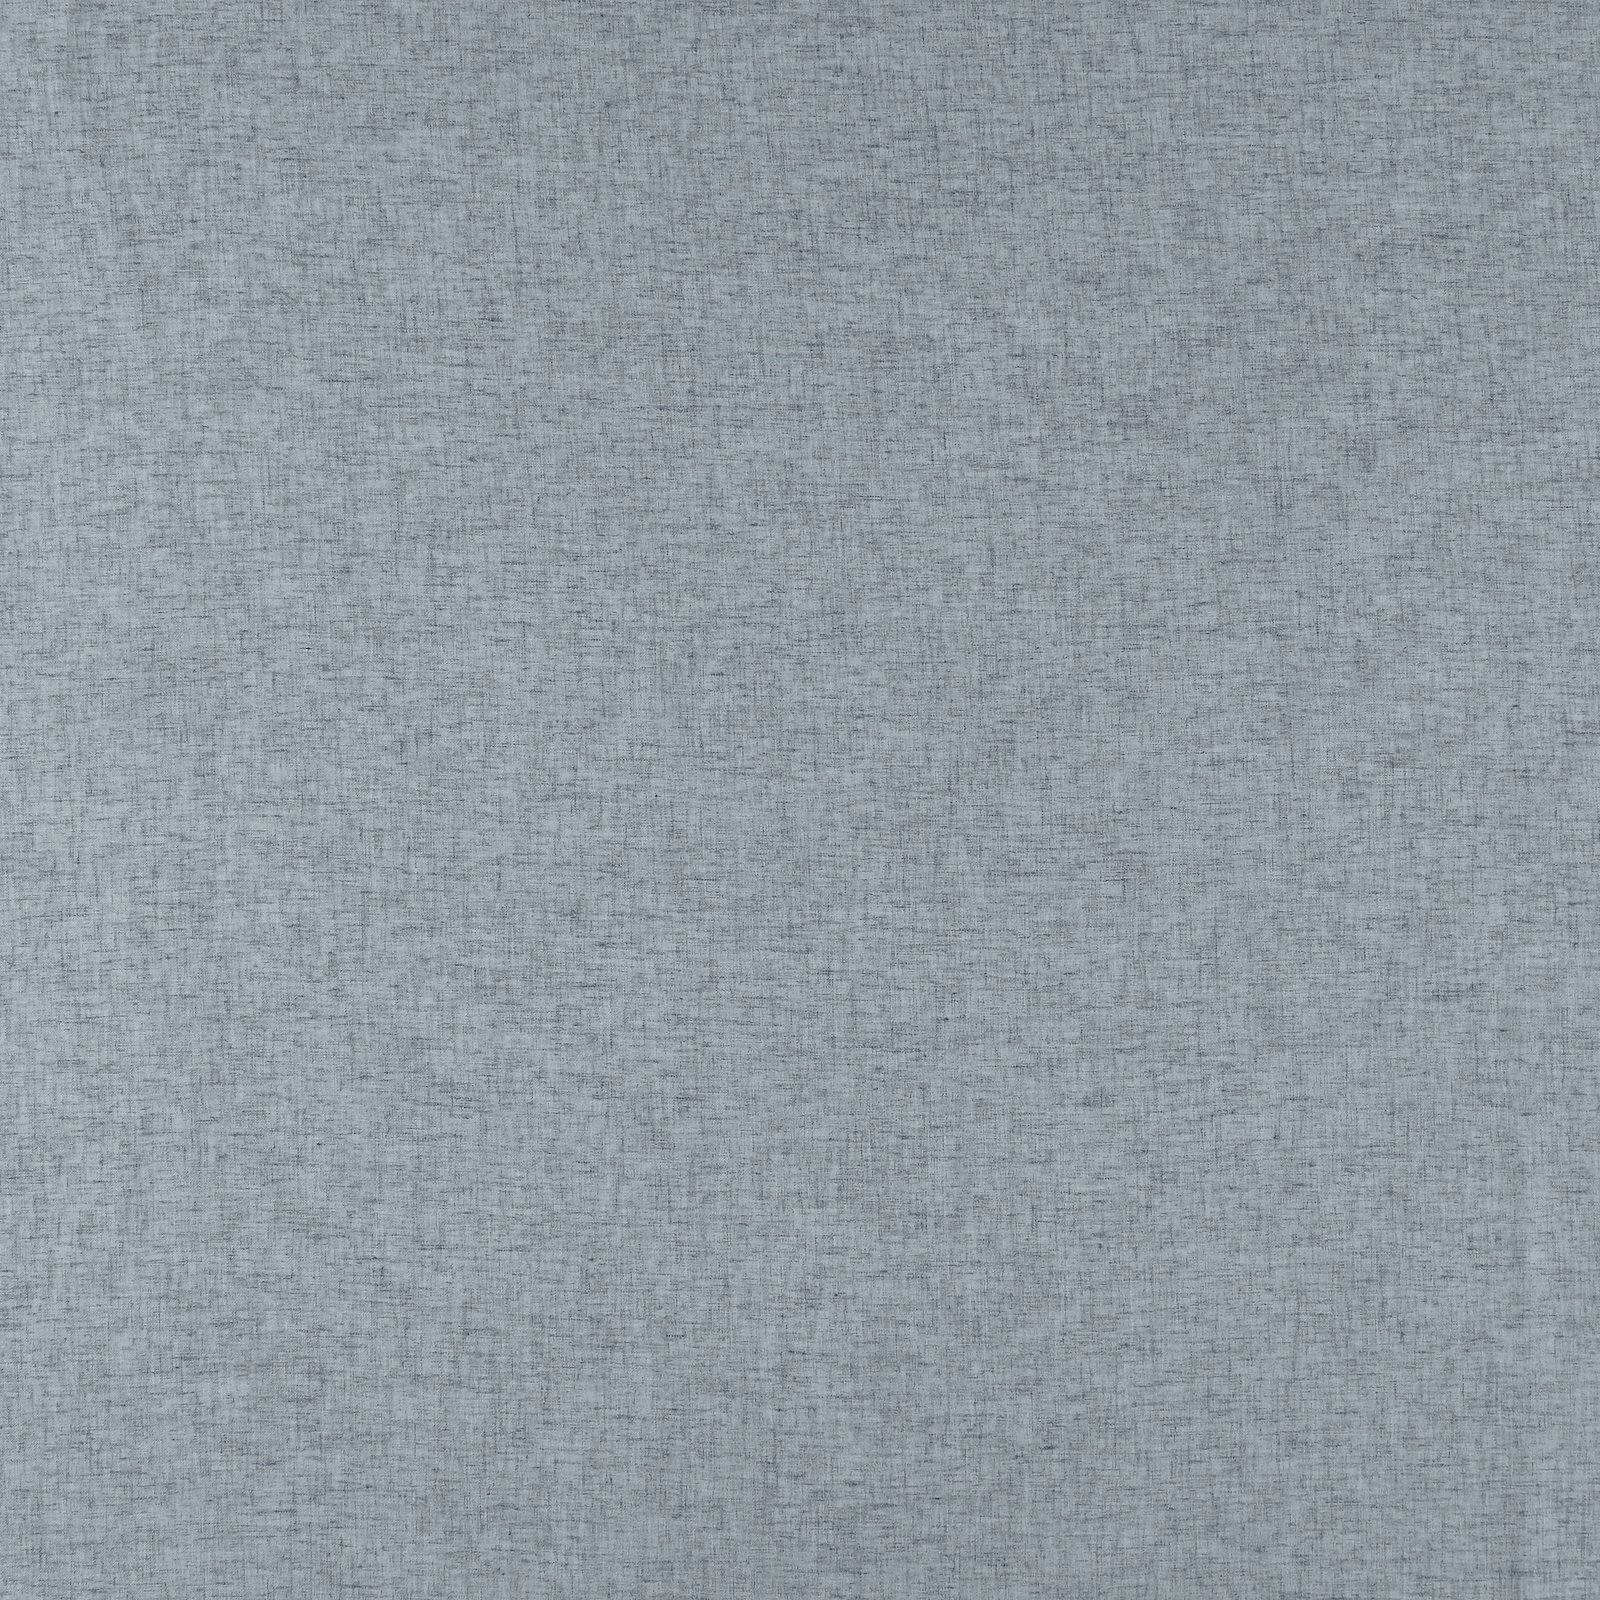 Voile dusty royal blue polyester/linen blend 835187_pack_solid